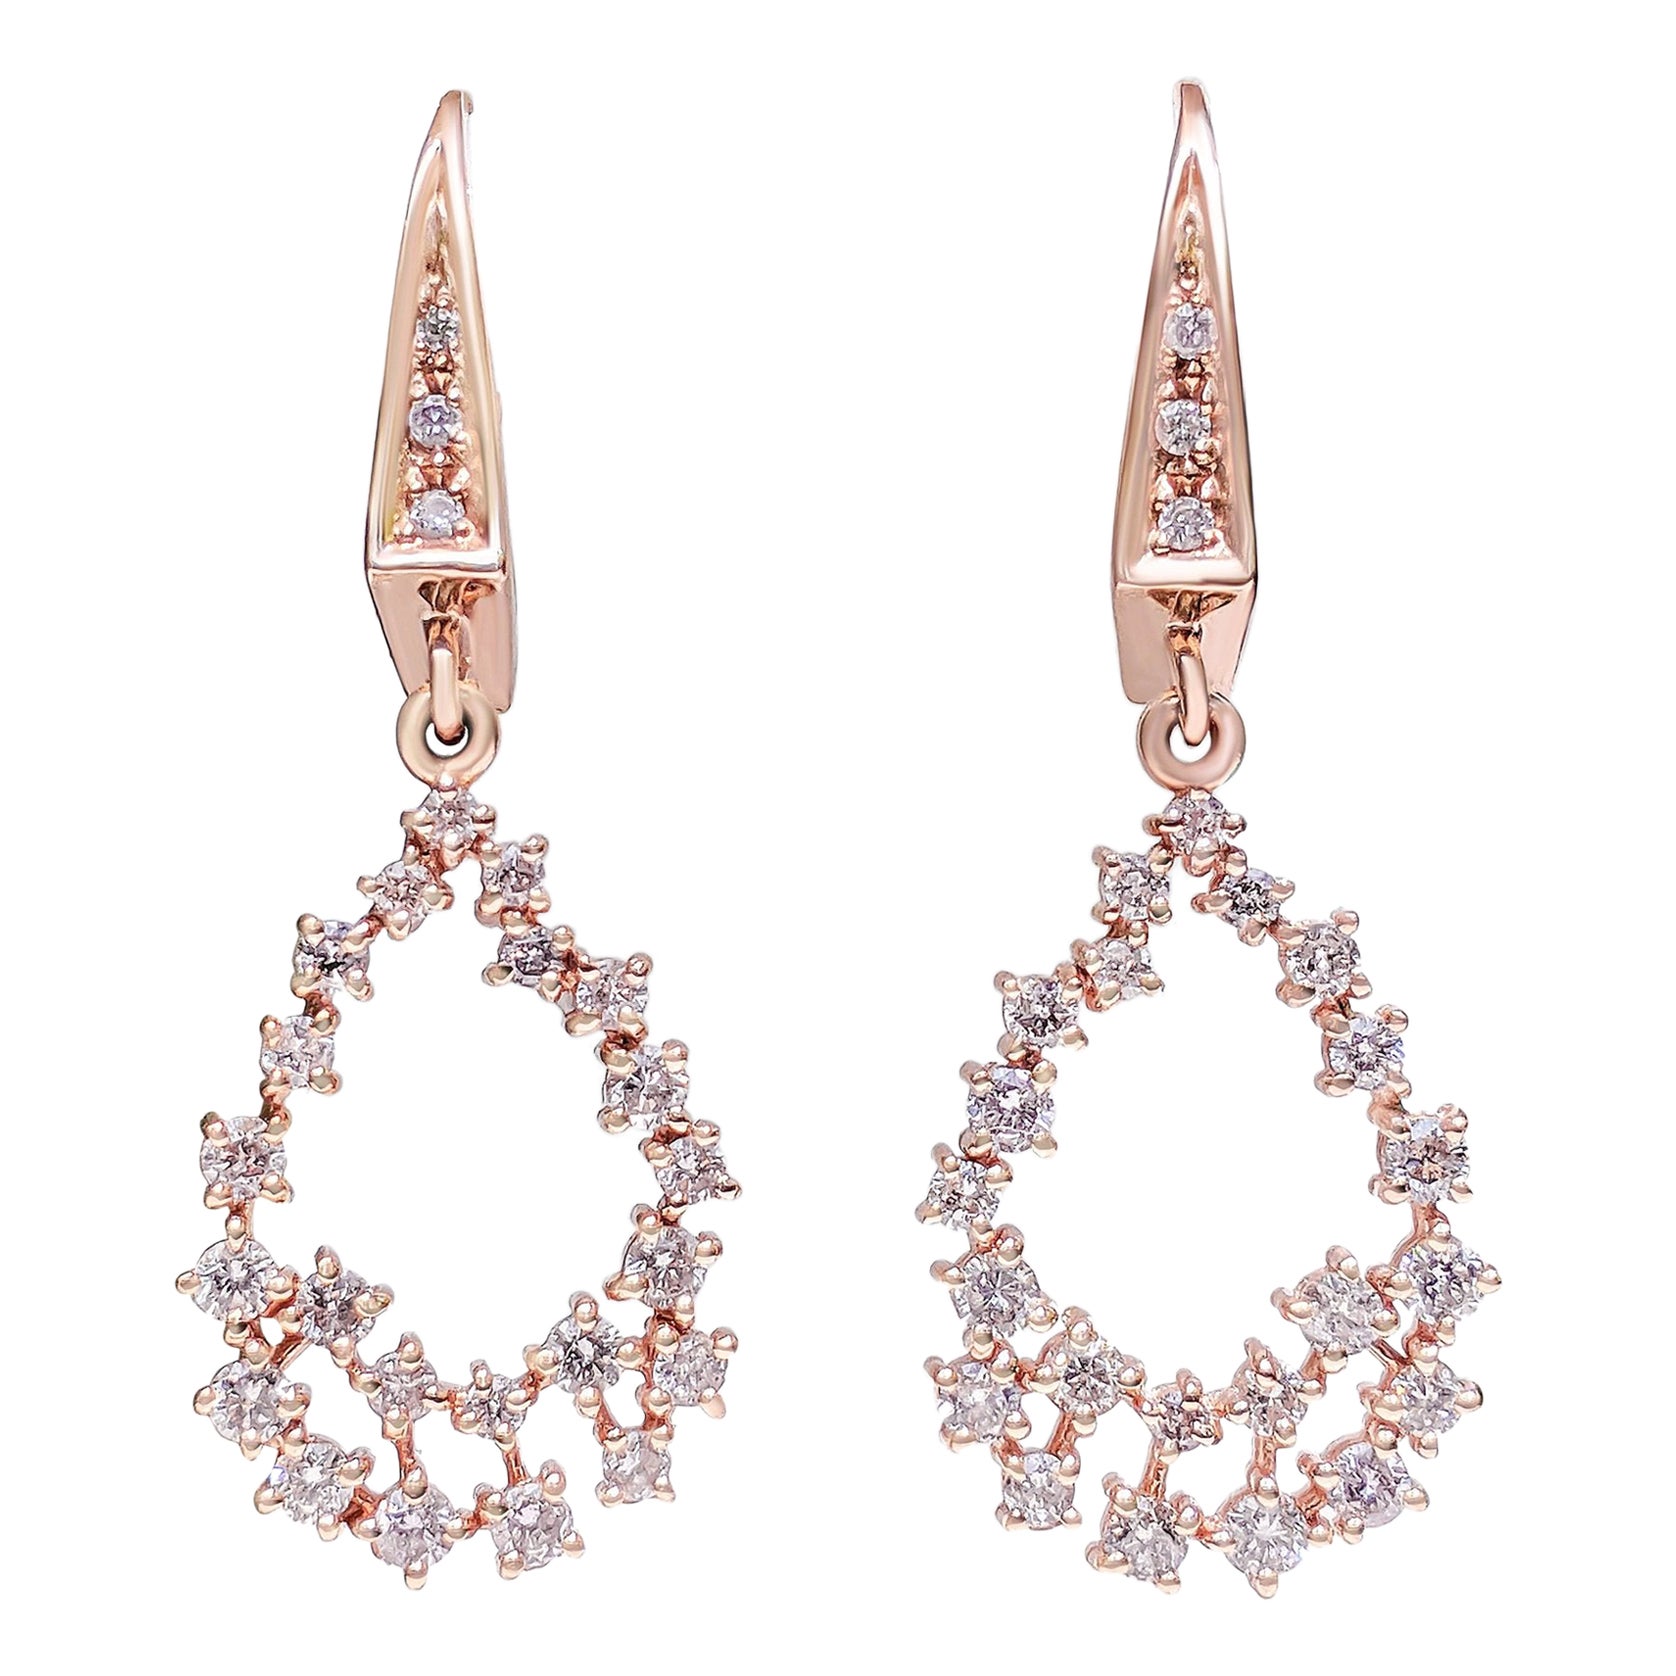 NO RESERVE! 1.05Cttw Fancy Pink Diamonds - 14 kt. Rose gold - Earrings For Sale